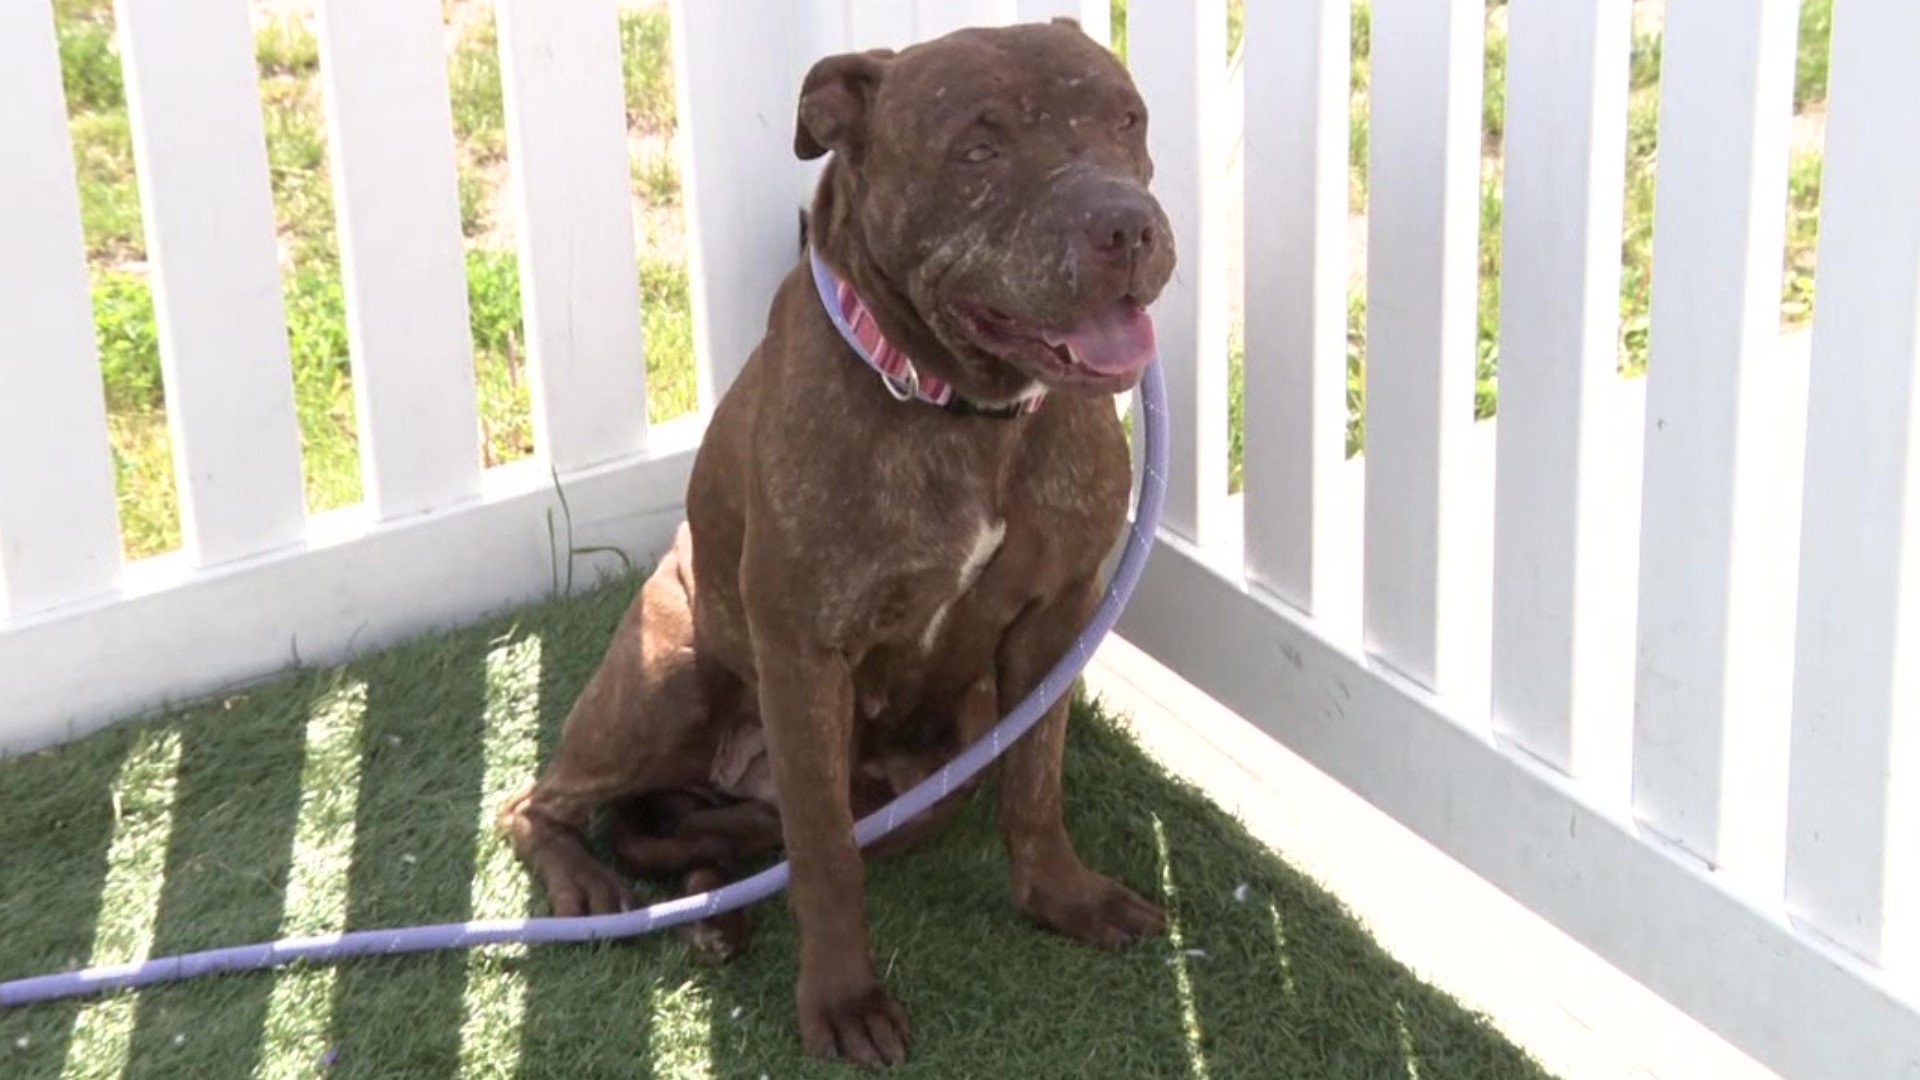 Vienna and Rosalyn, two pit bull mix dogs, were rescued from the streets in Scranton and brought to Griffin Pond Animal Shelter, clearly suffering from injuries.